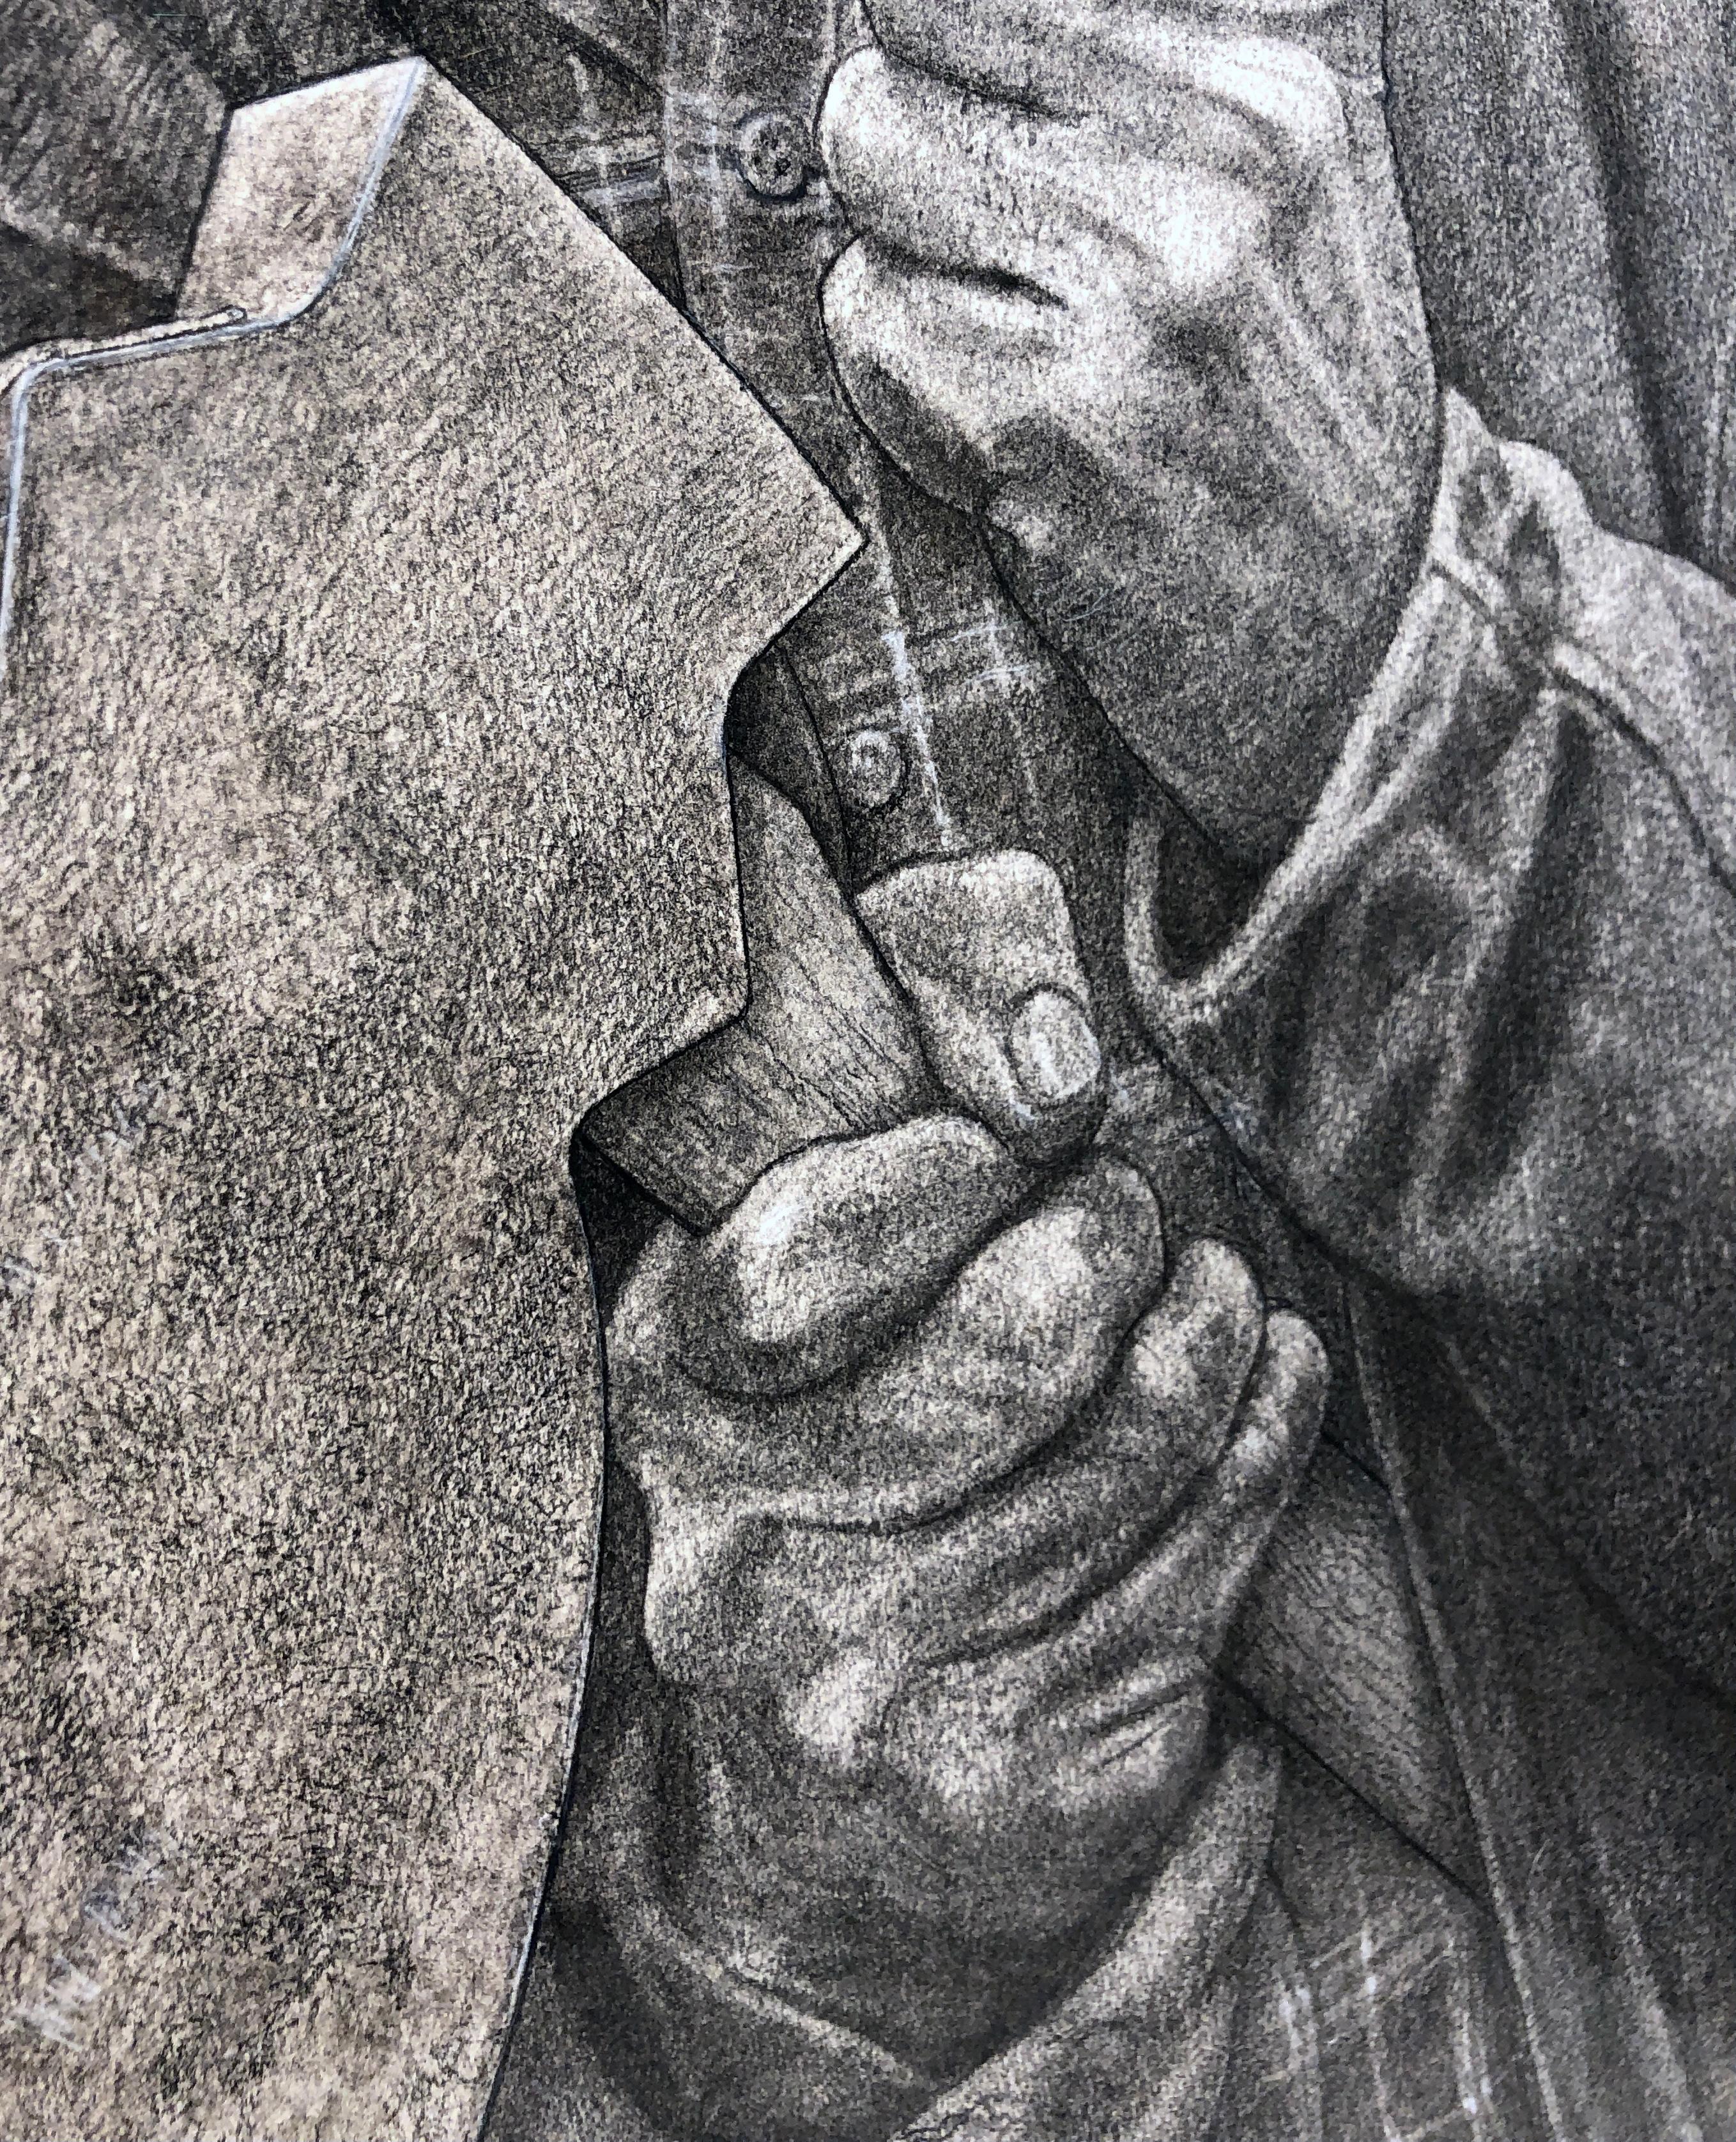 While charcoal is naturally a loose drawing medium, David Becker uses it with precision.  With a rich range of value and  strong darks, Becker captures the fine details with exacting clarity.  In his drawing 